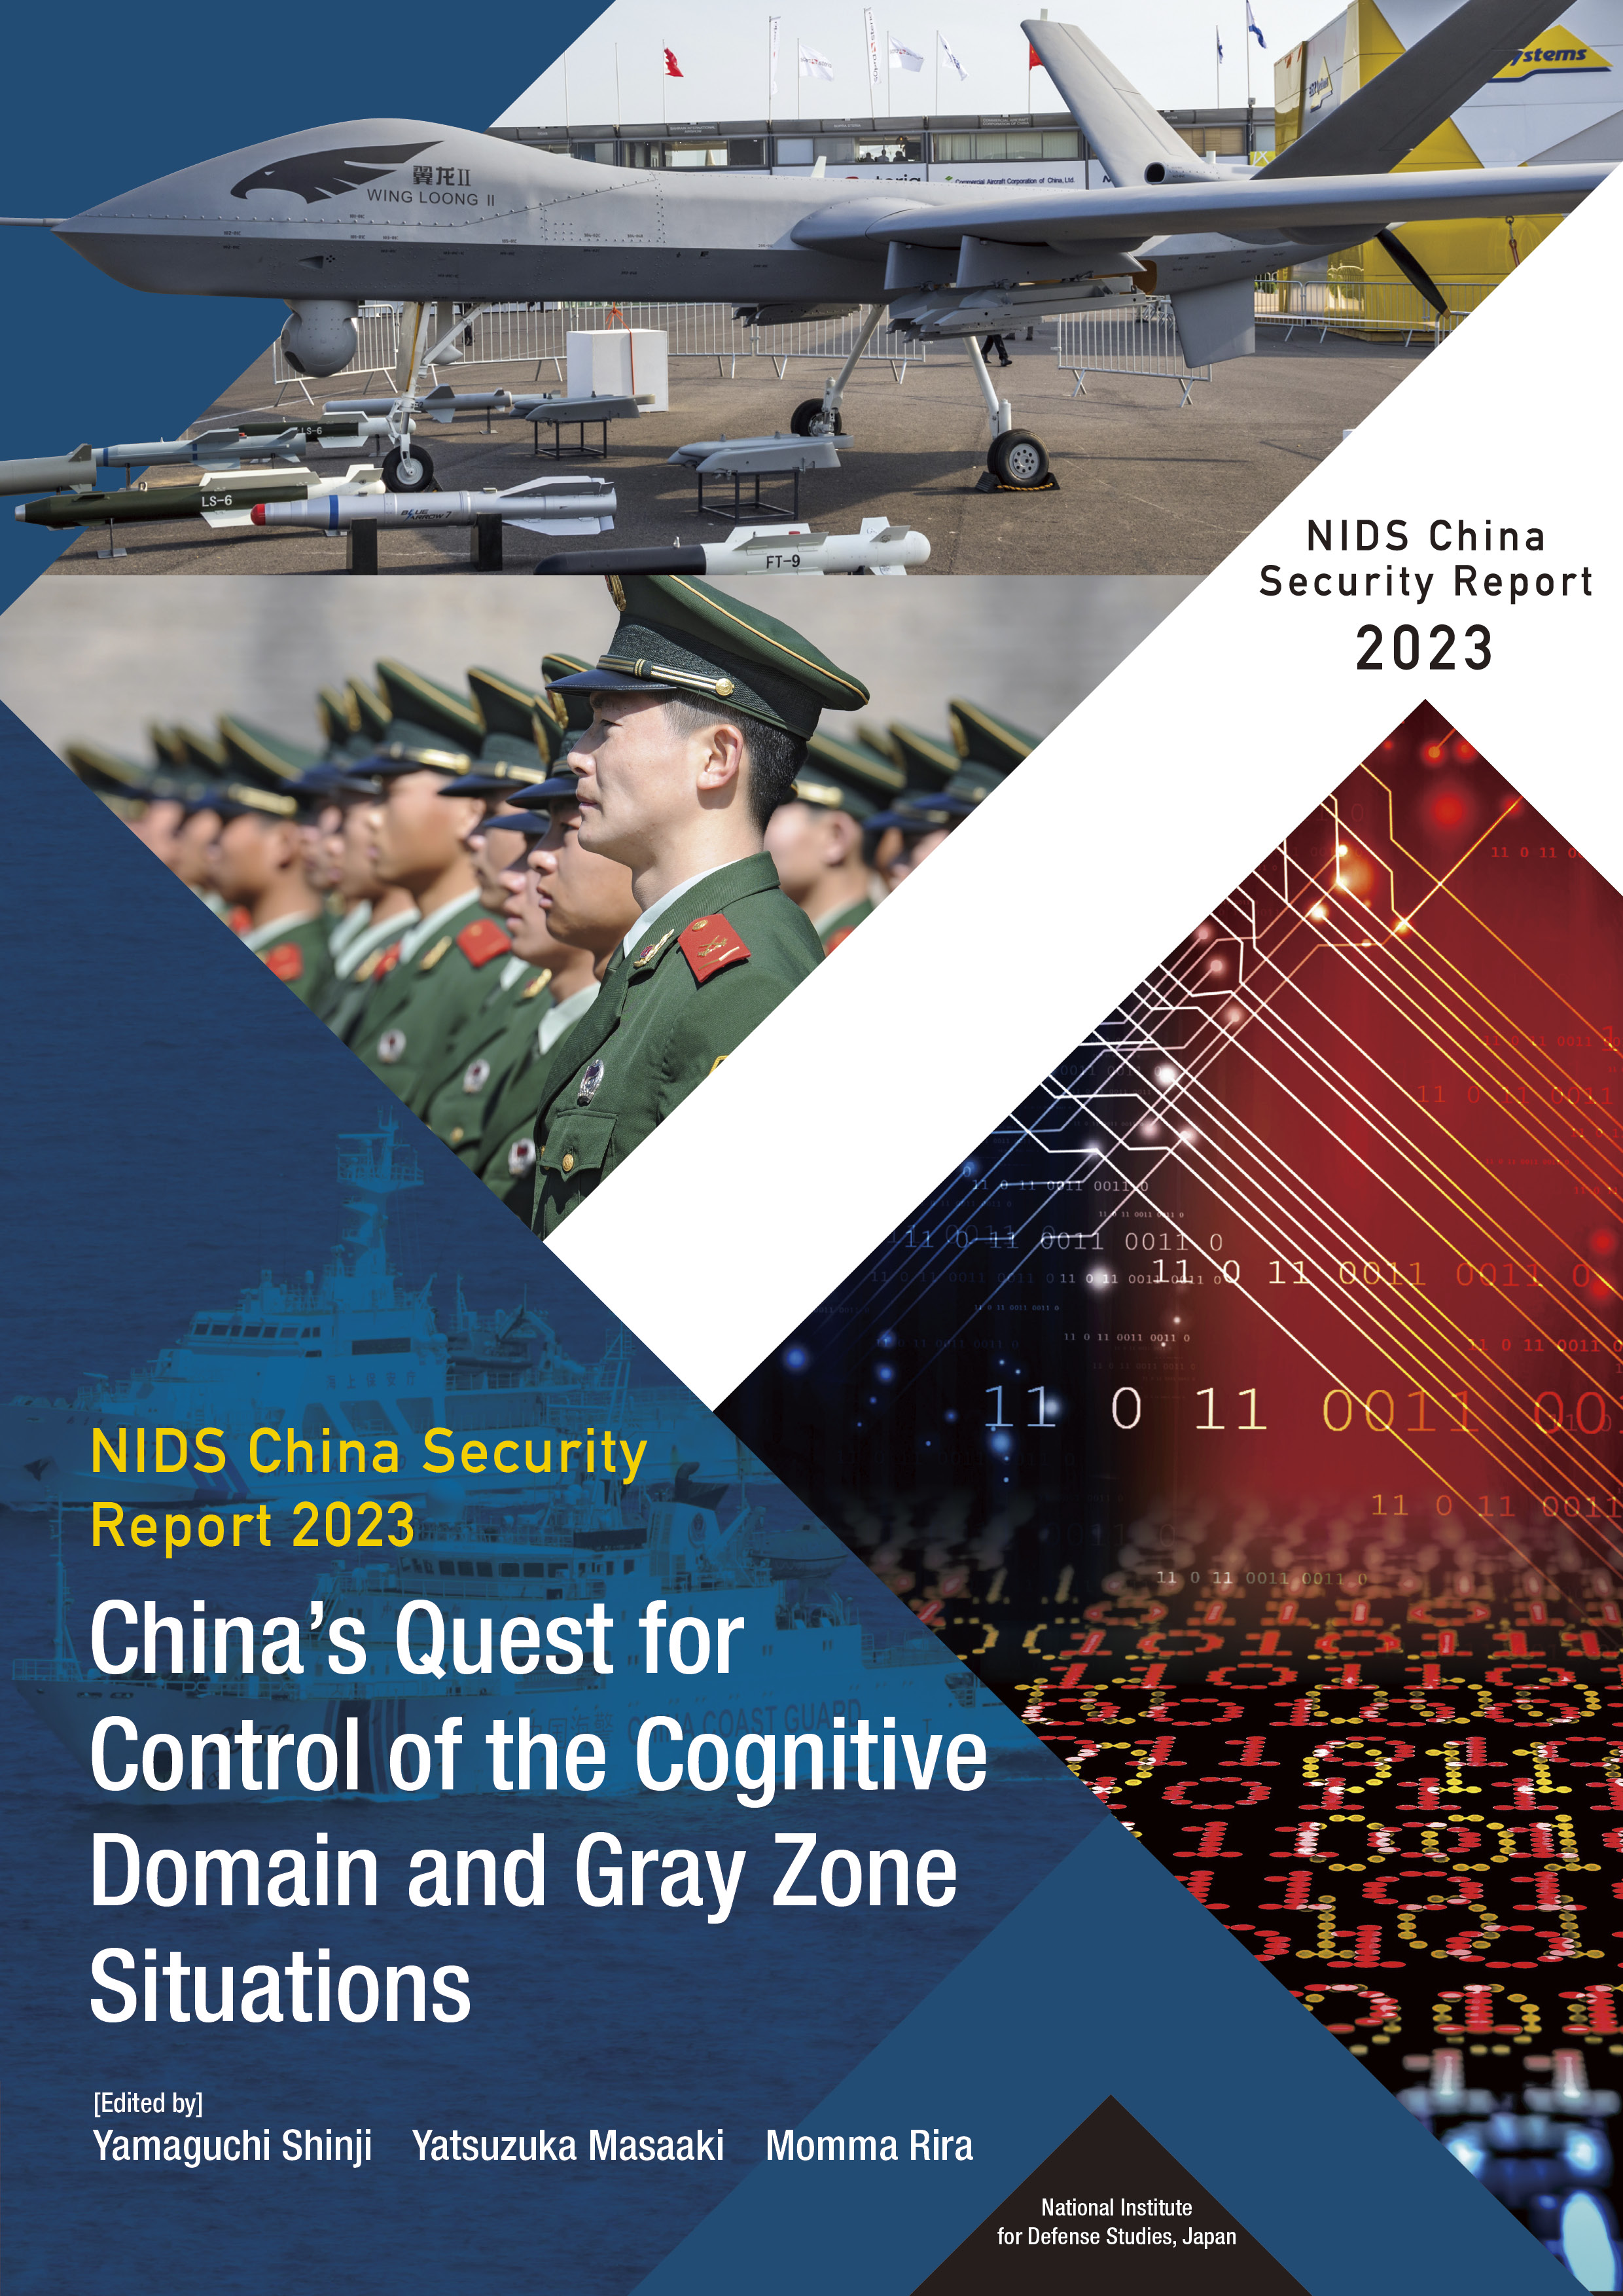 China's Quest for Control of the Cognitive Domain and Gray Zone Situations